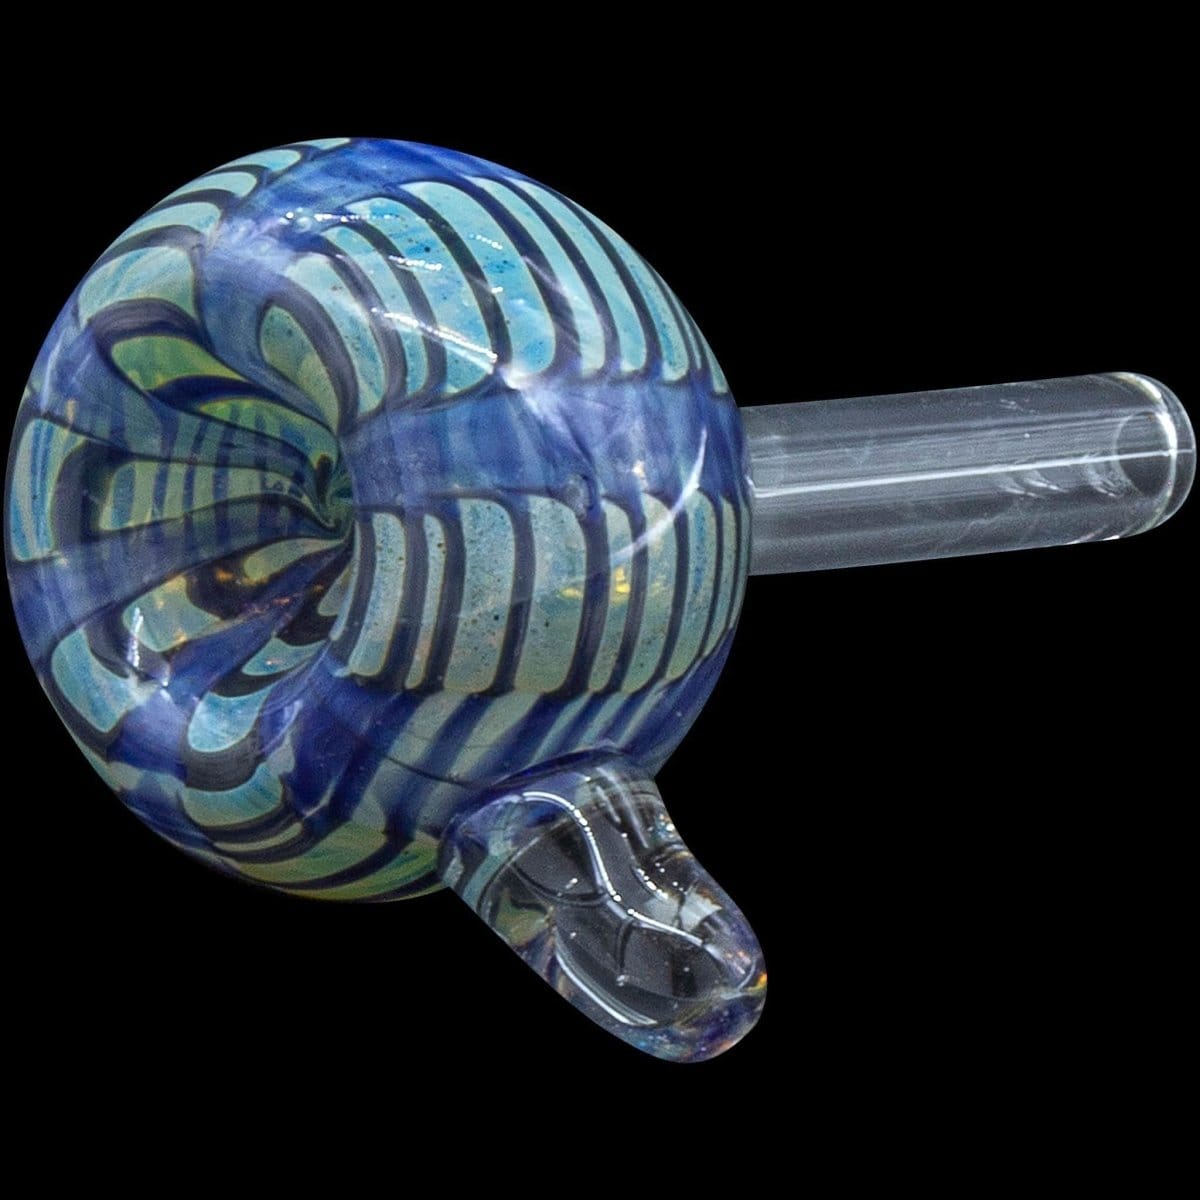 LA Pipes Smoking Accessory Blue Color Raked Bubble Pull-Stem 9mm Slide Bowl